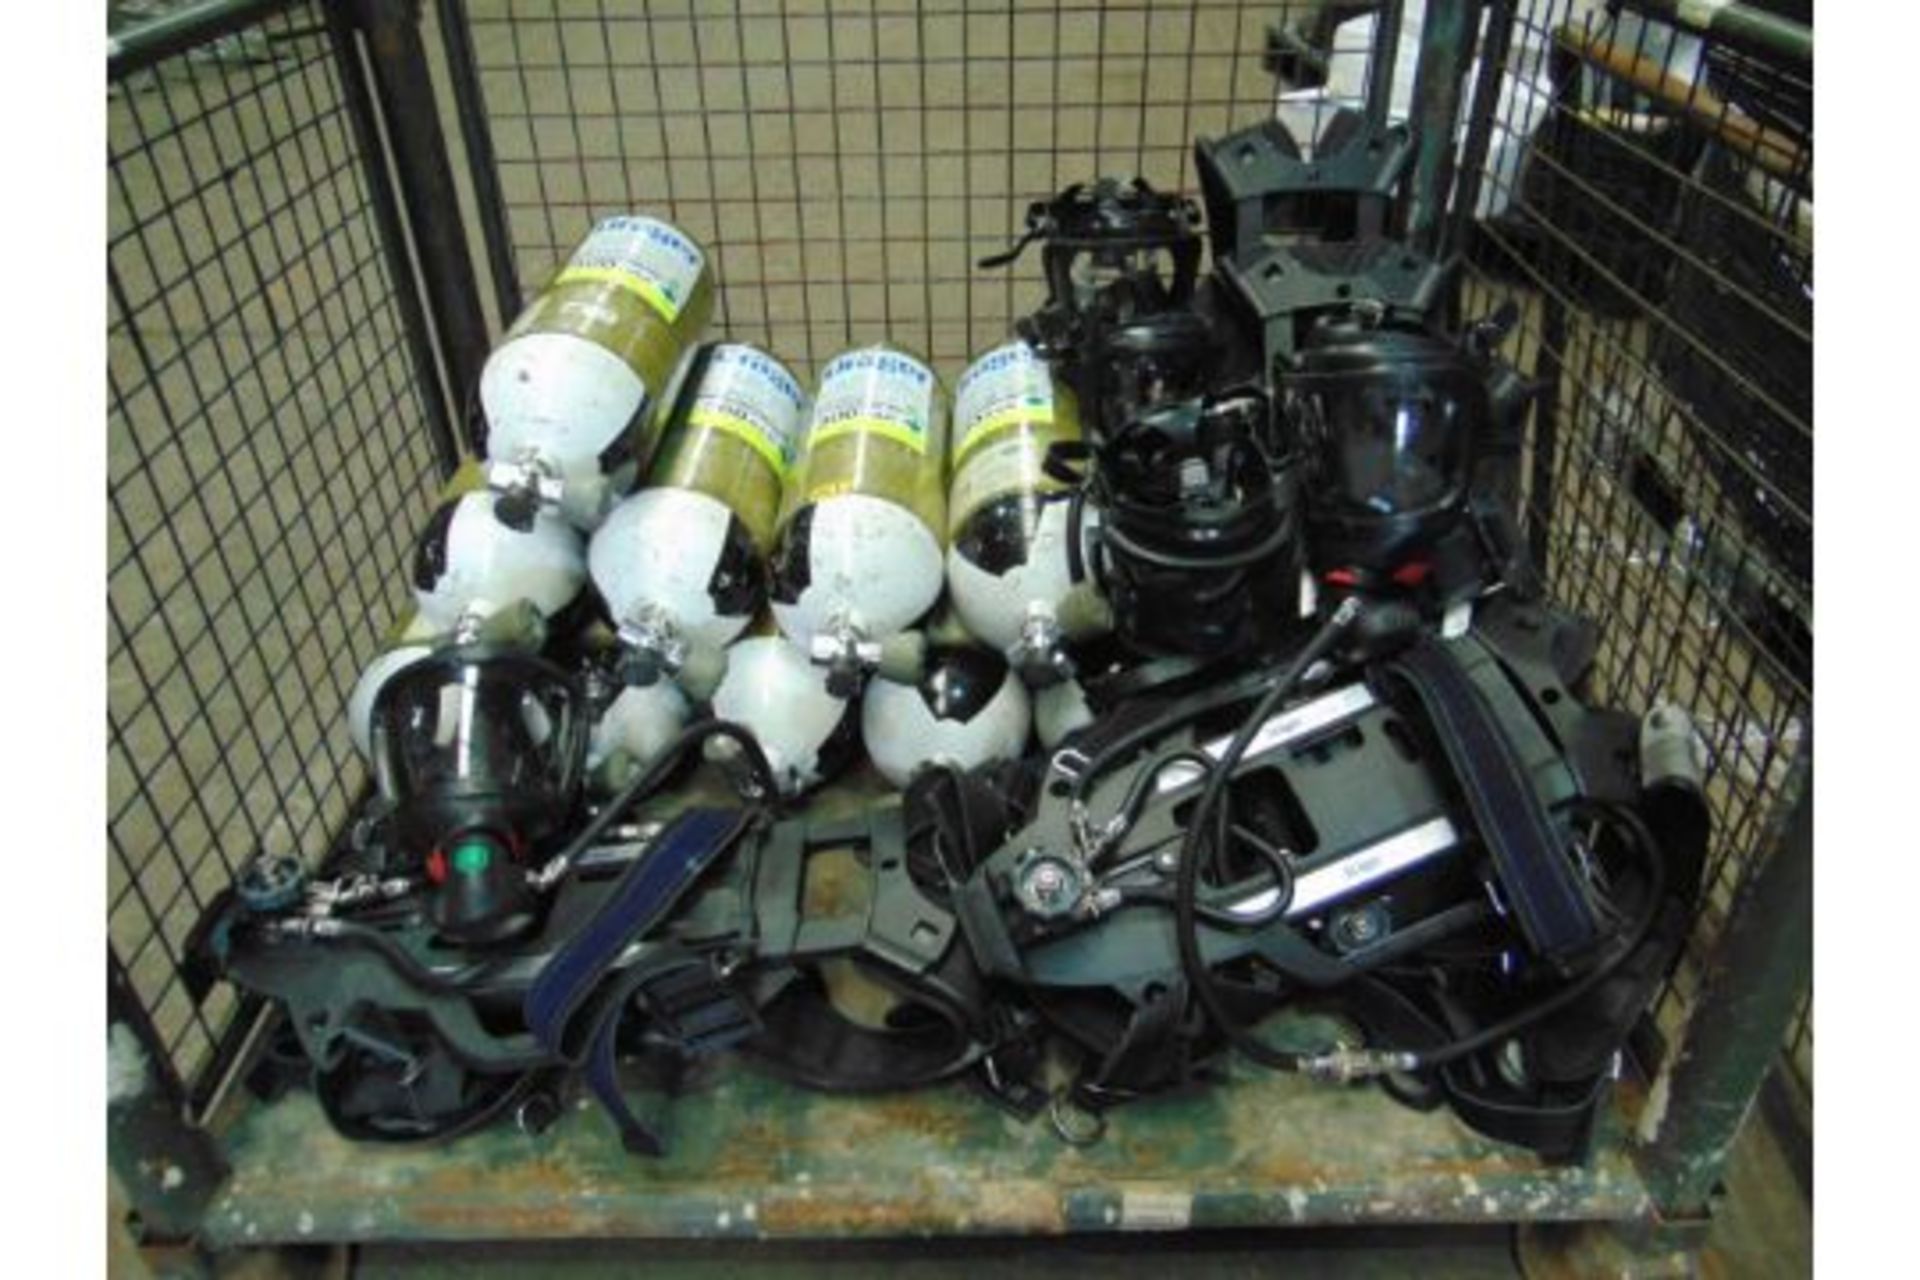 5 x Drager PSS 7000 Self Contained Breathing Apparatus w/ 10 x Drager 300 Bar Air Cylinders - Image 18 of 22